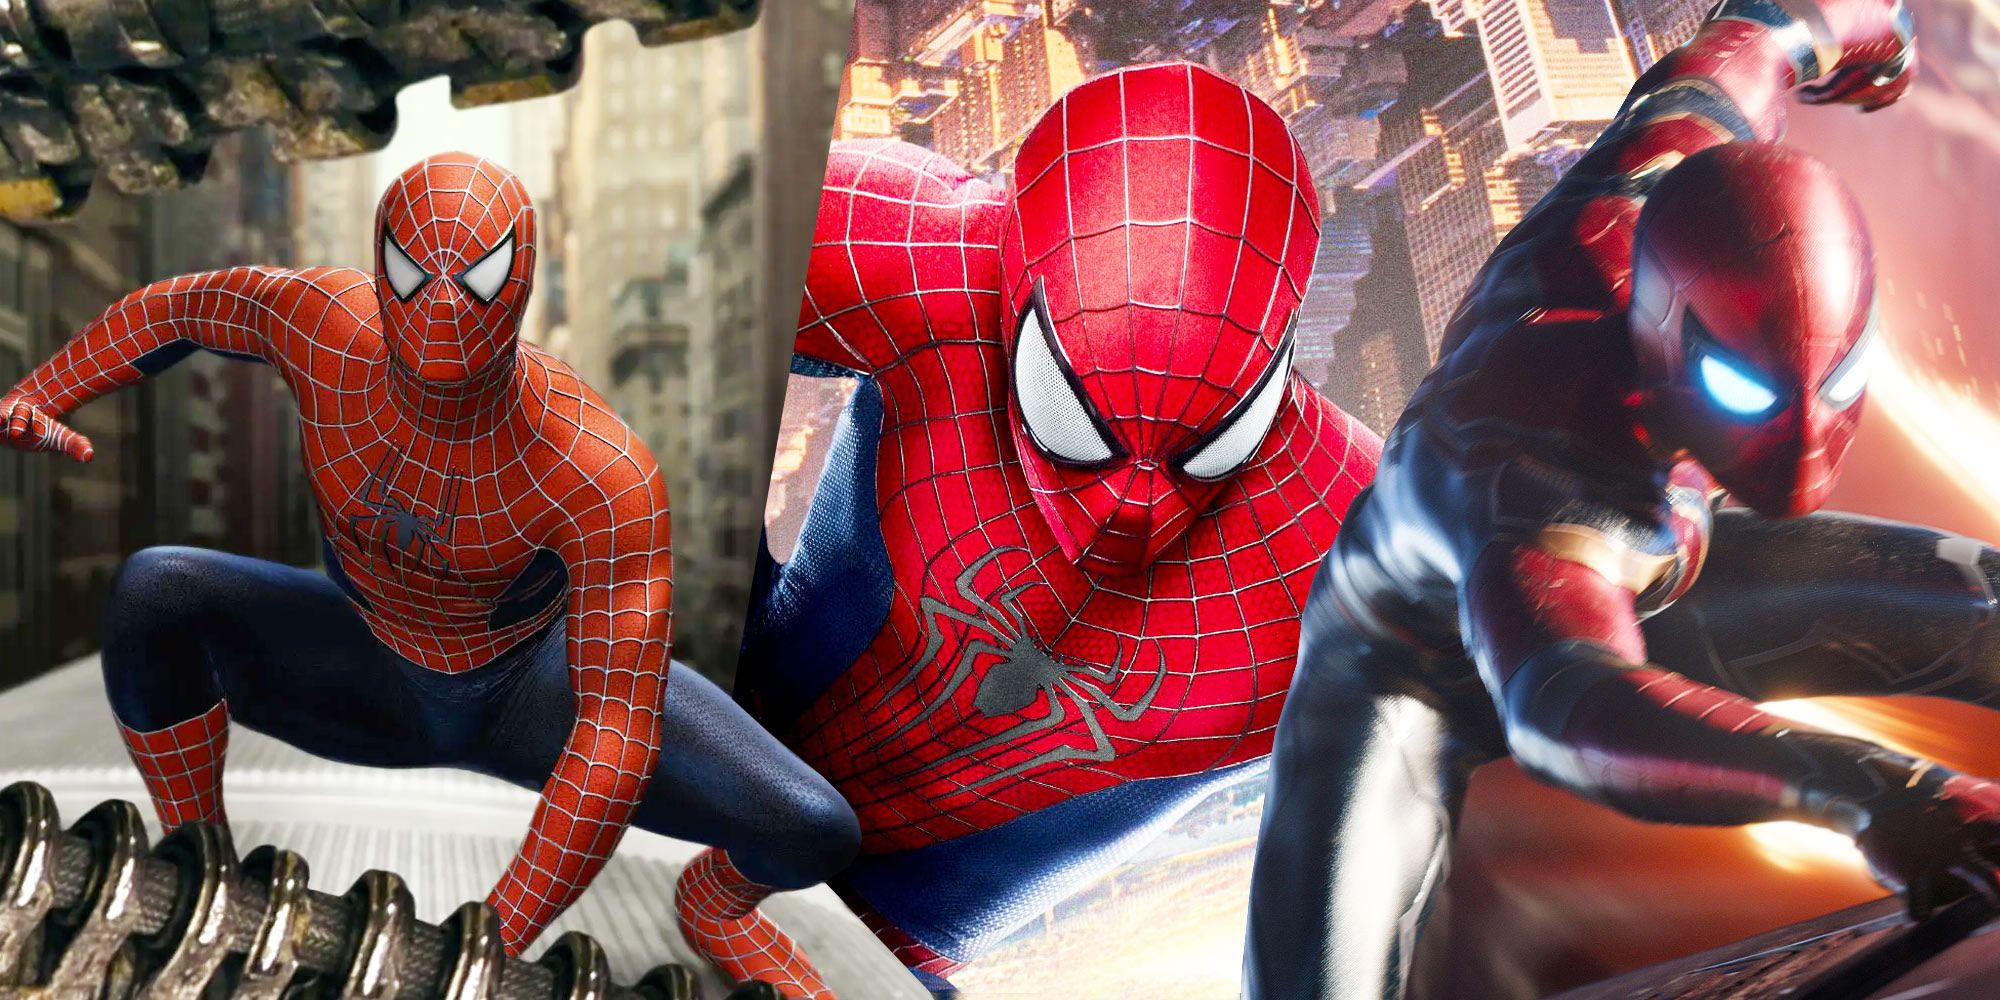 Blended image of Sam Raimi Spider-Man, The Amazing Spider-Man, and MCU Spider-Man.